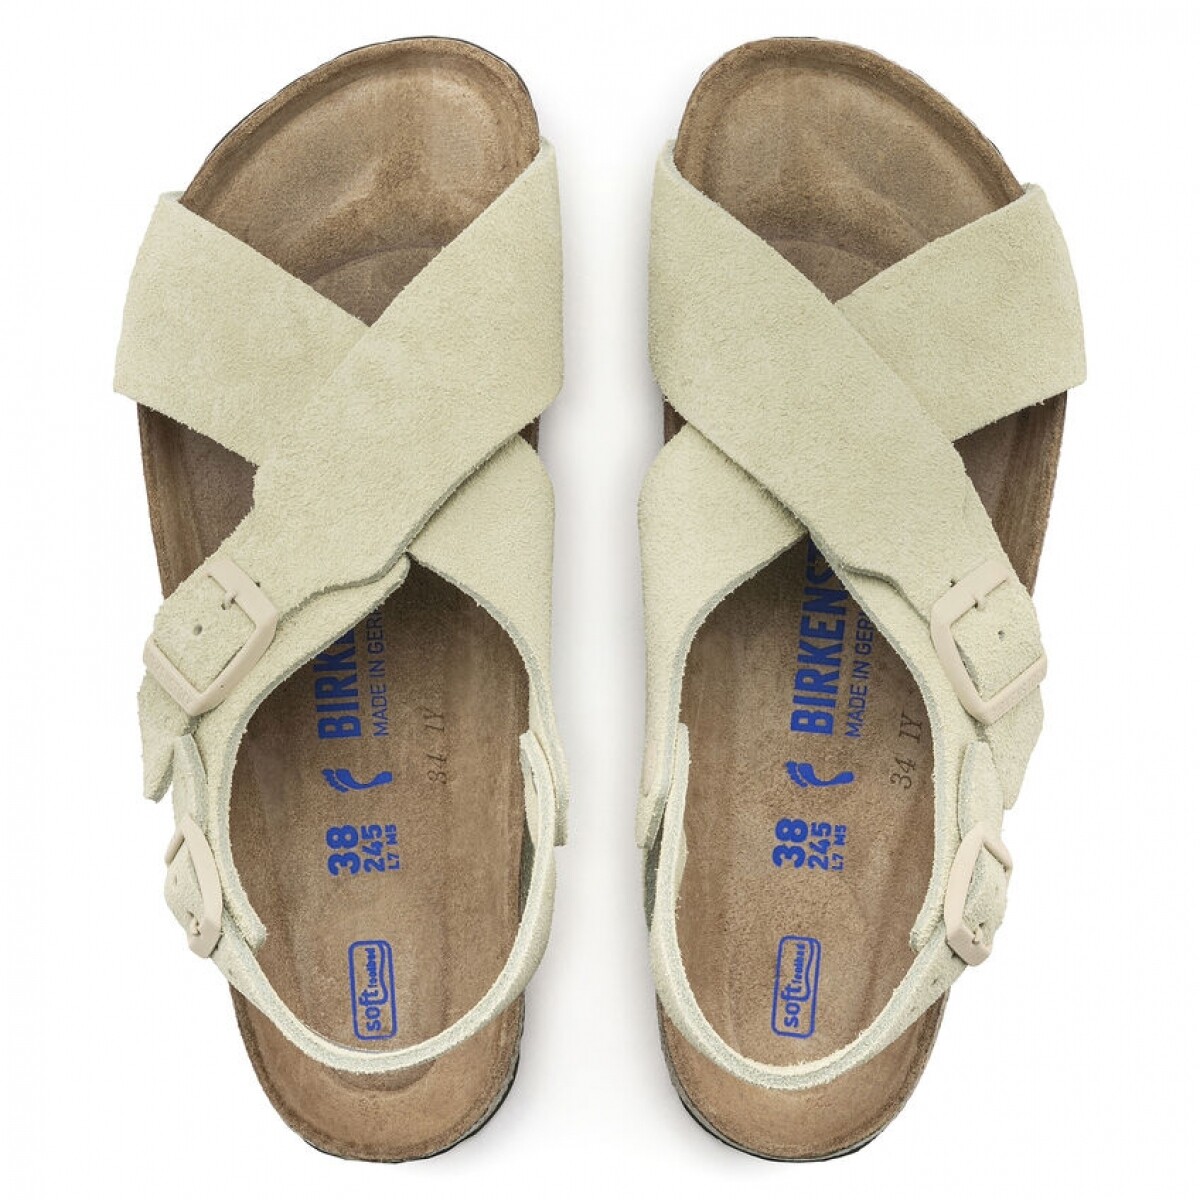 Birkenstock Tulum Soft Footbed
Suede Leather - Almond / Narrow fit